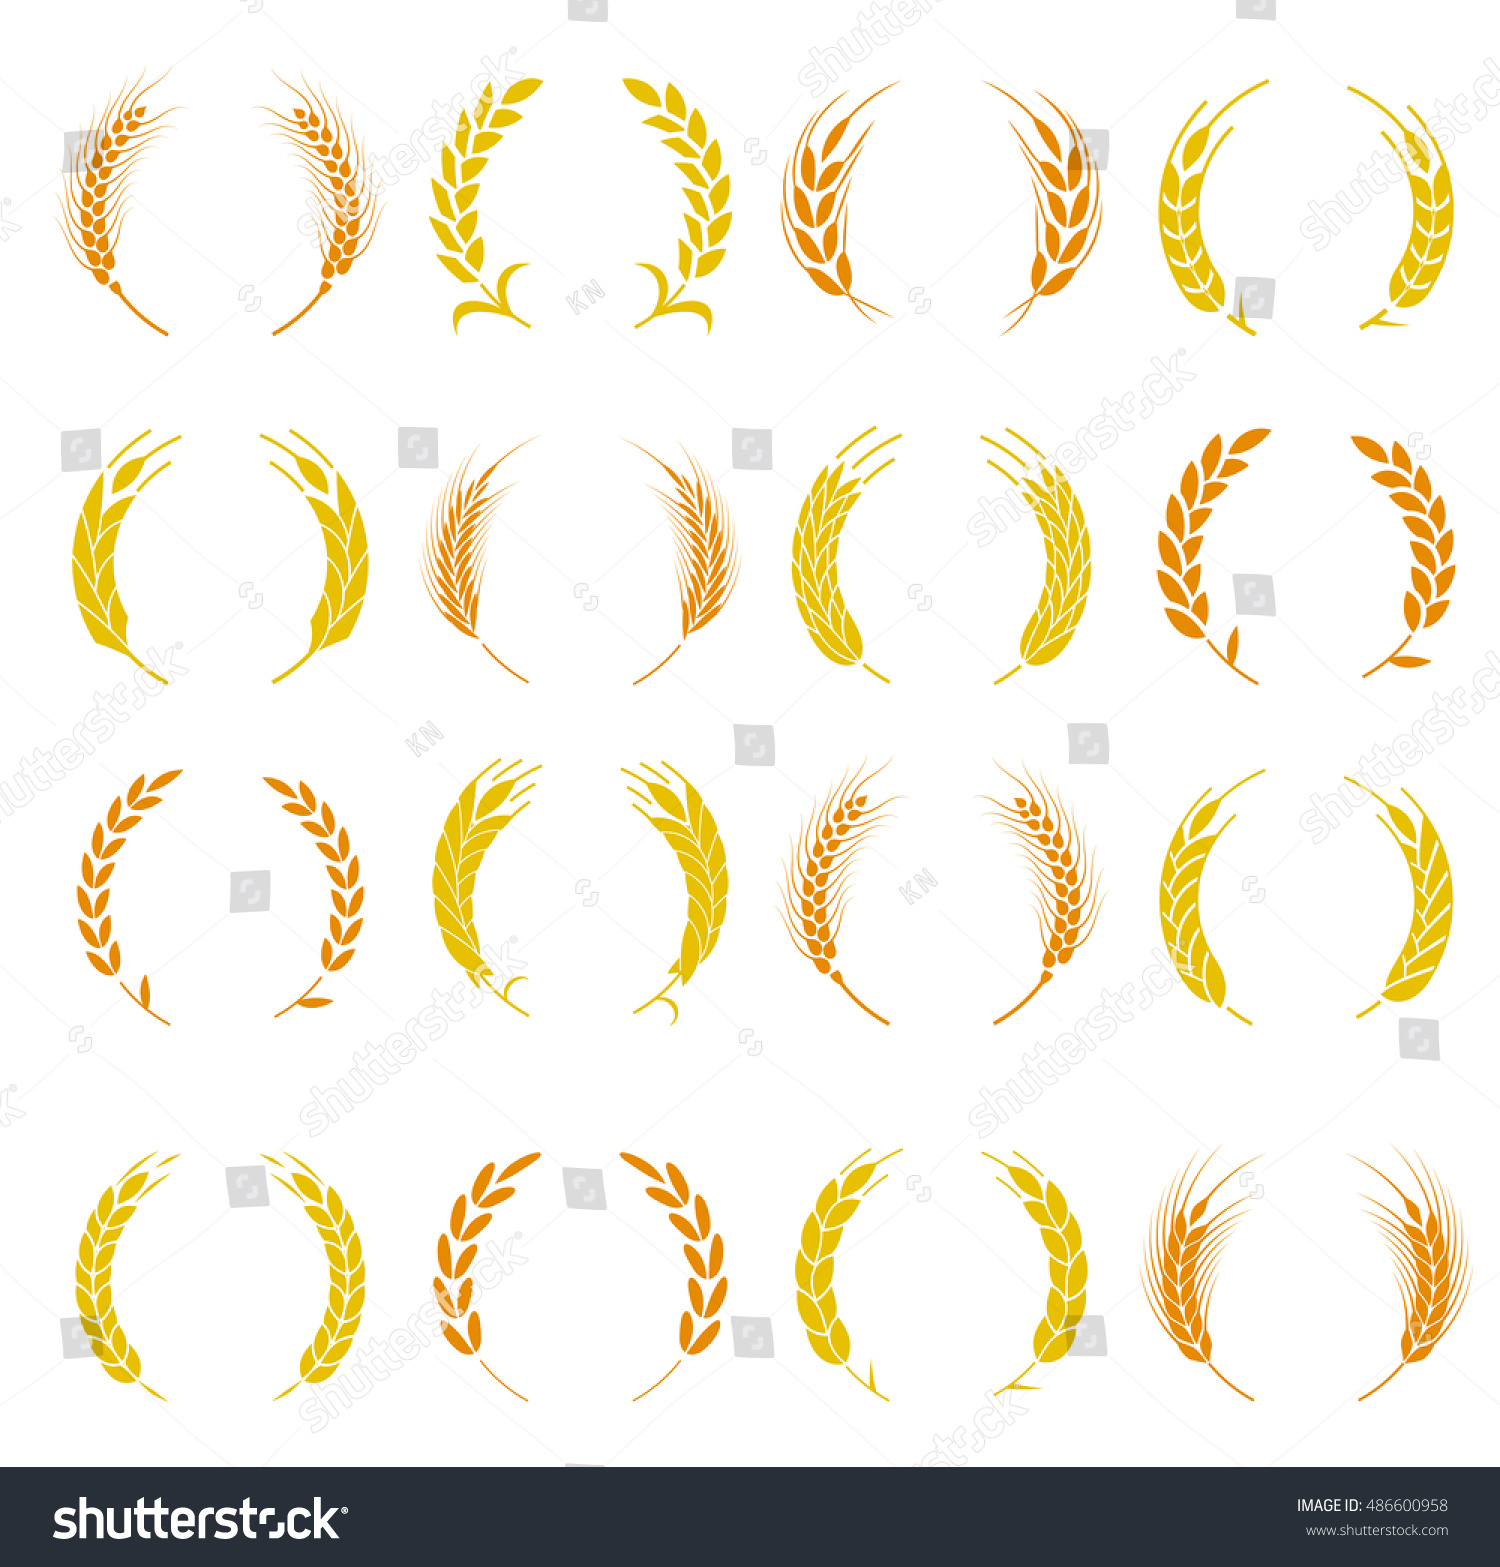 SVG of Wheat ear symbols for logo design. Agriculture grain, organic plant, bread food. Design elements for bread packaging or beer label. Set of silhouette circular laurel foliate and wheat wreaths. svg